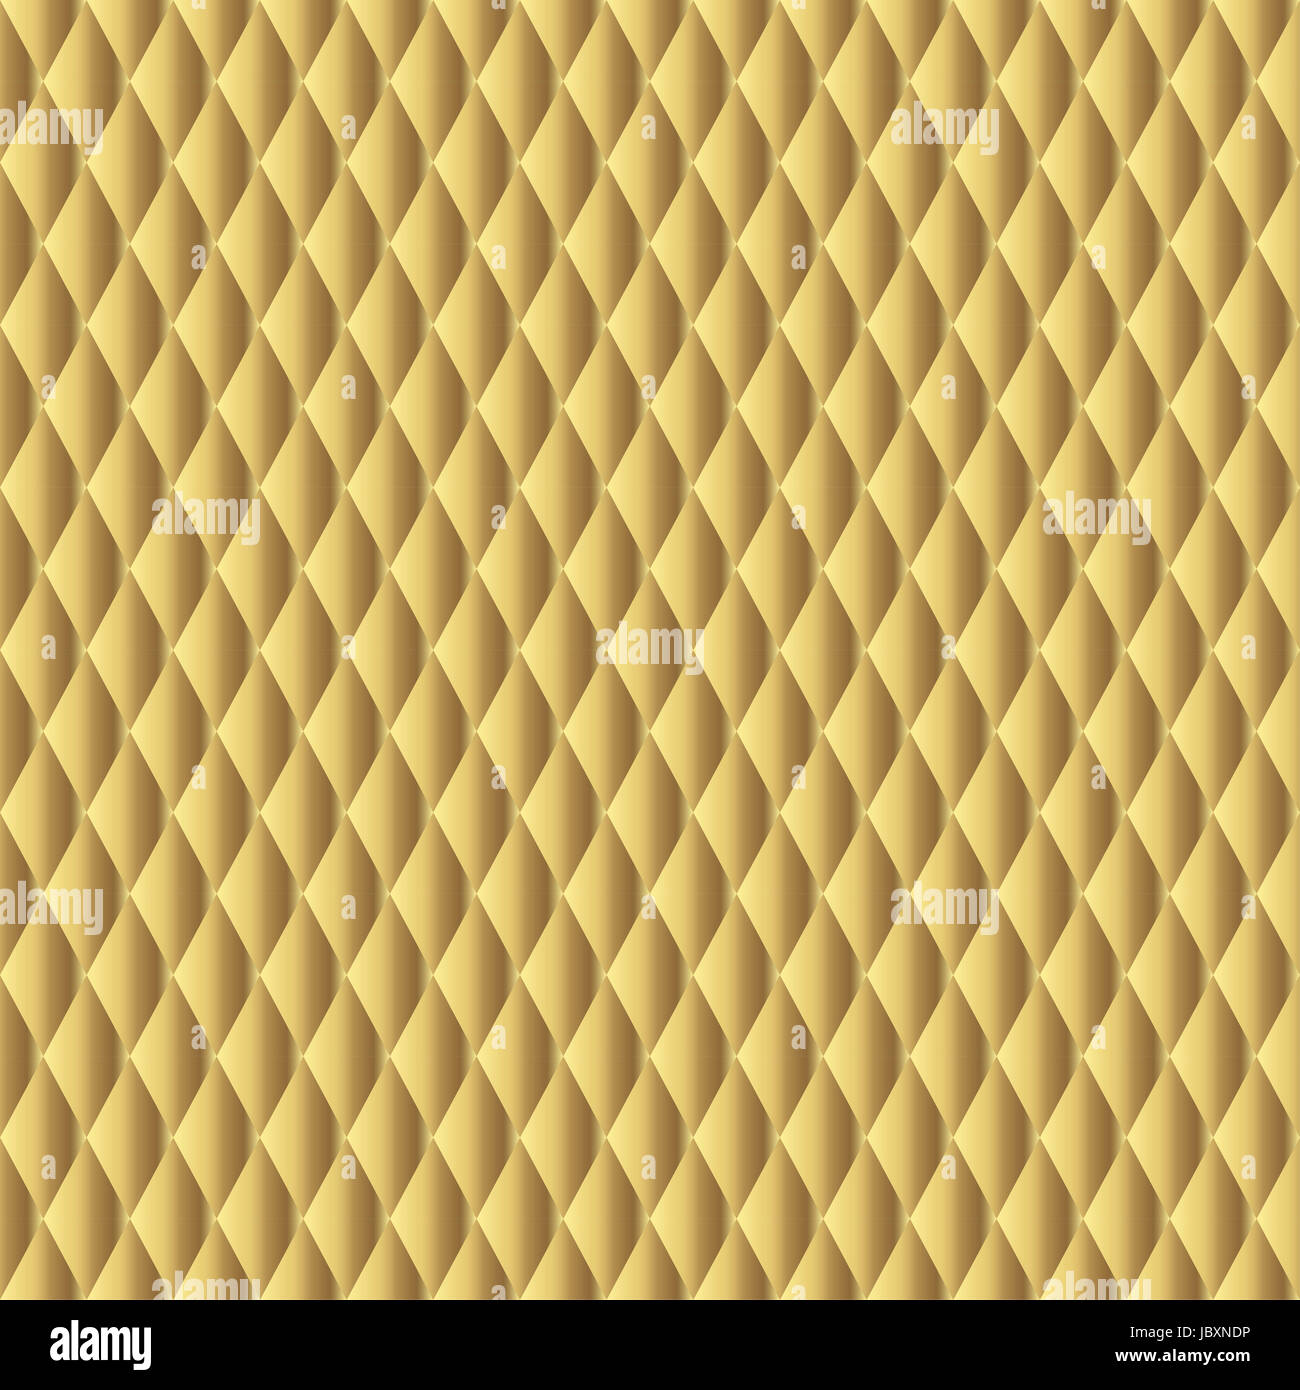 seamless gold colored abstract background vector illustration Stock Photo